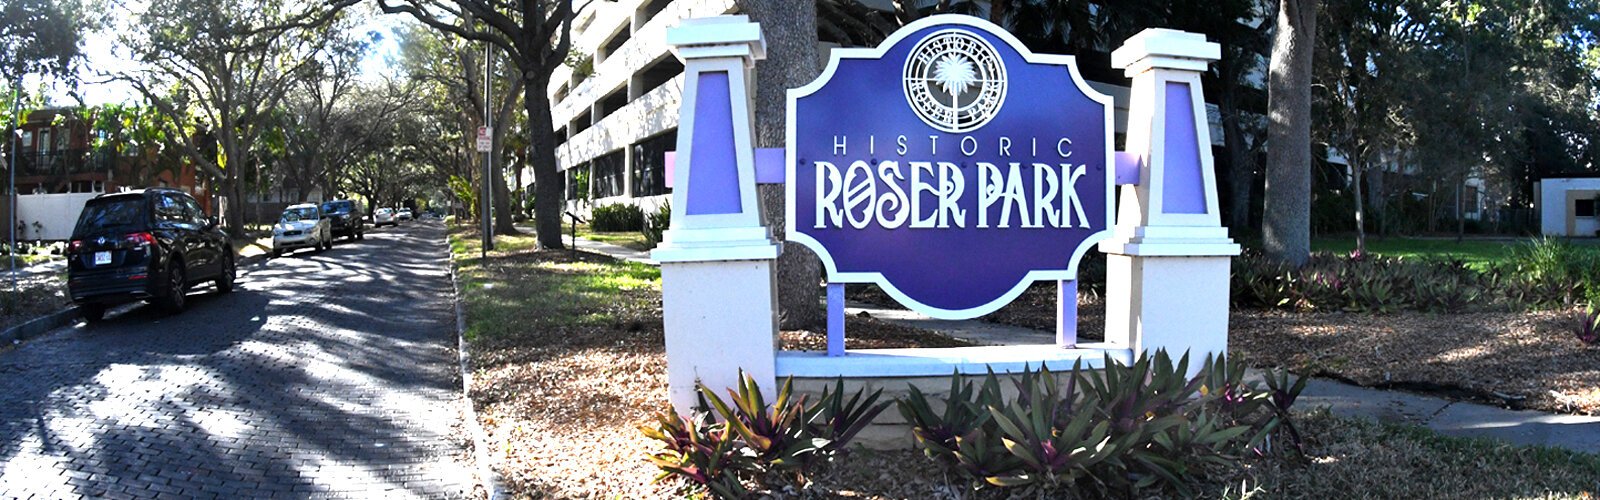 Developed in the early 20th century by wealthy developer Charles Martin Roser (from Ohio), Historic Roser Park is located south of downtown St Petersburg and is the city’s first designated historic district.